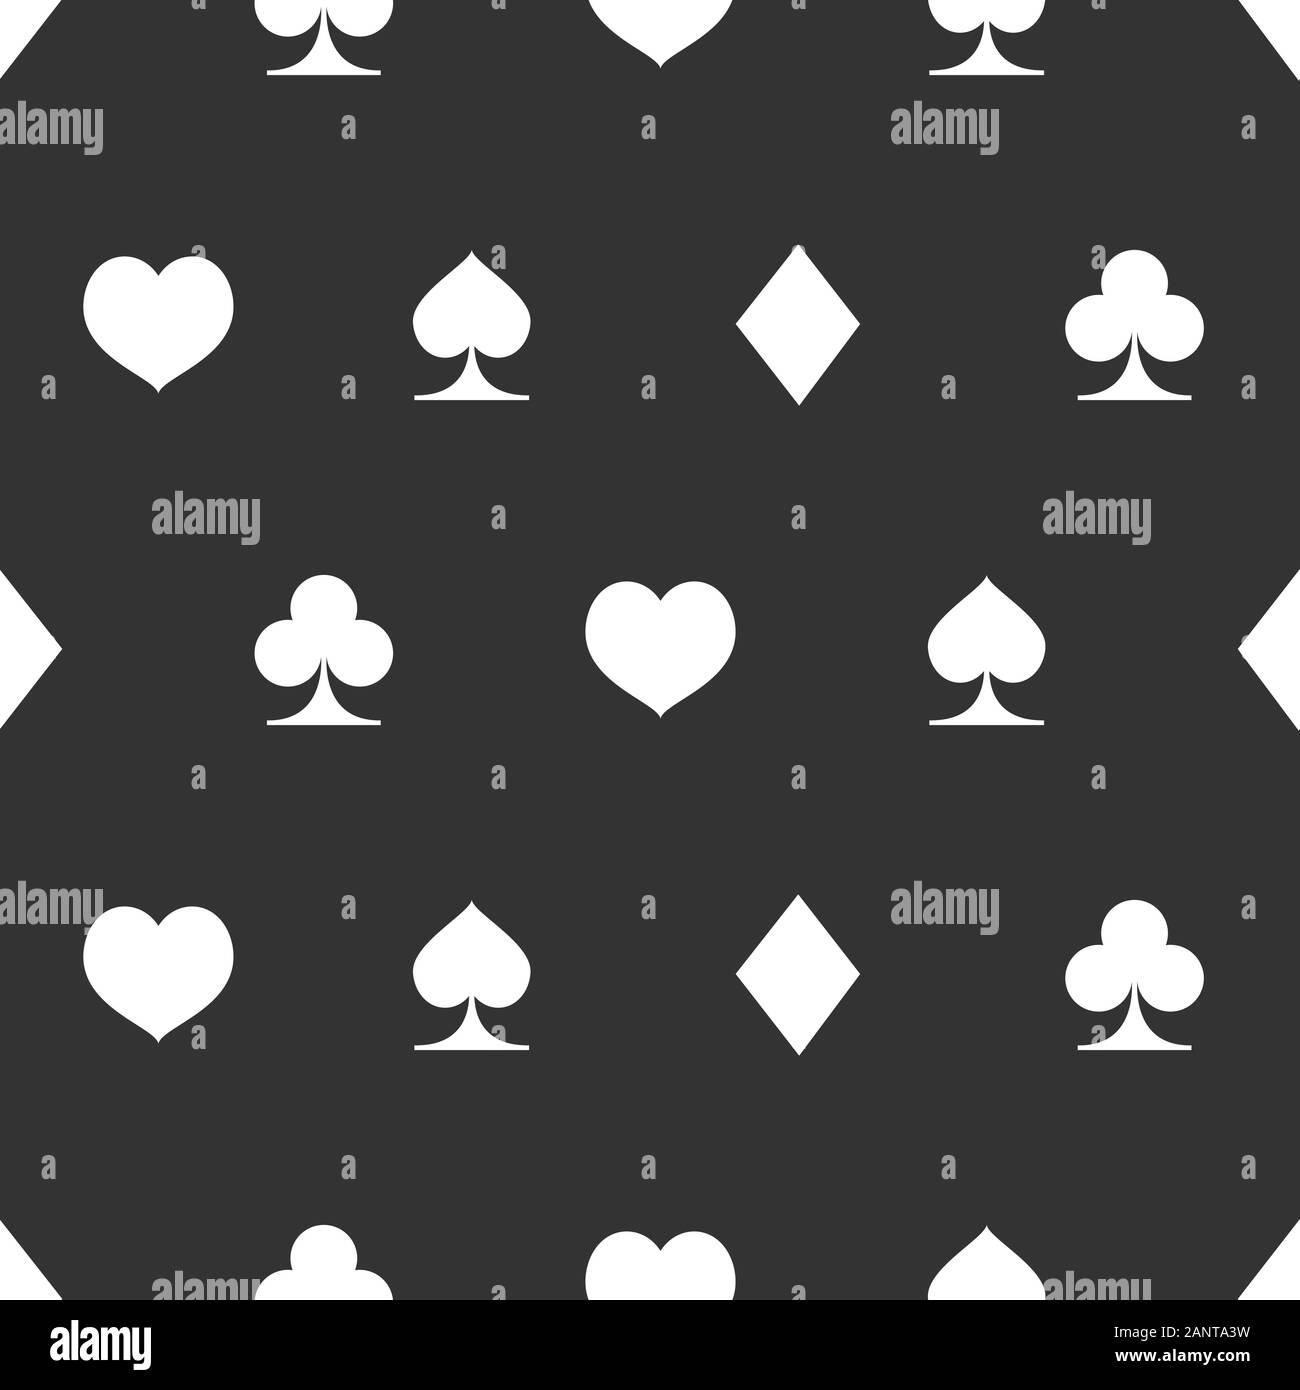 Seamless pattern with suits of playing cards, black and white vector illustration for casino Stock Vector